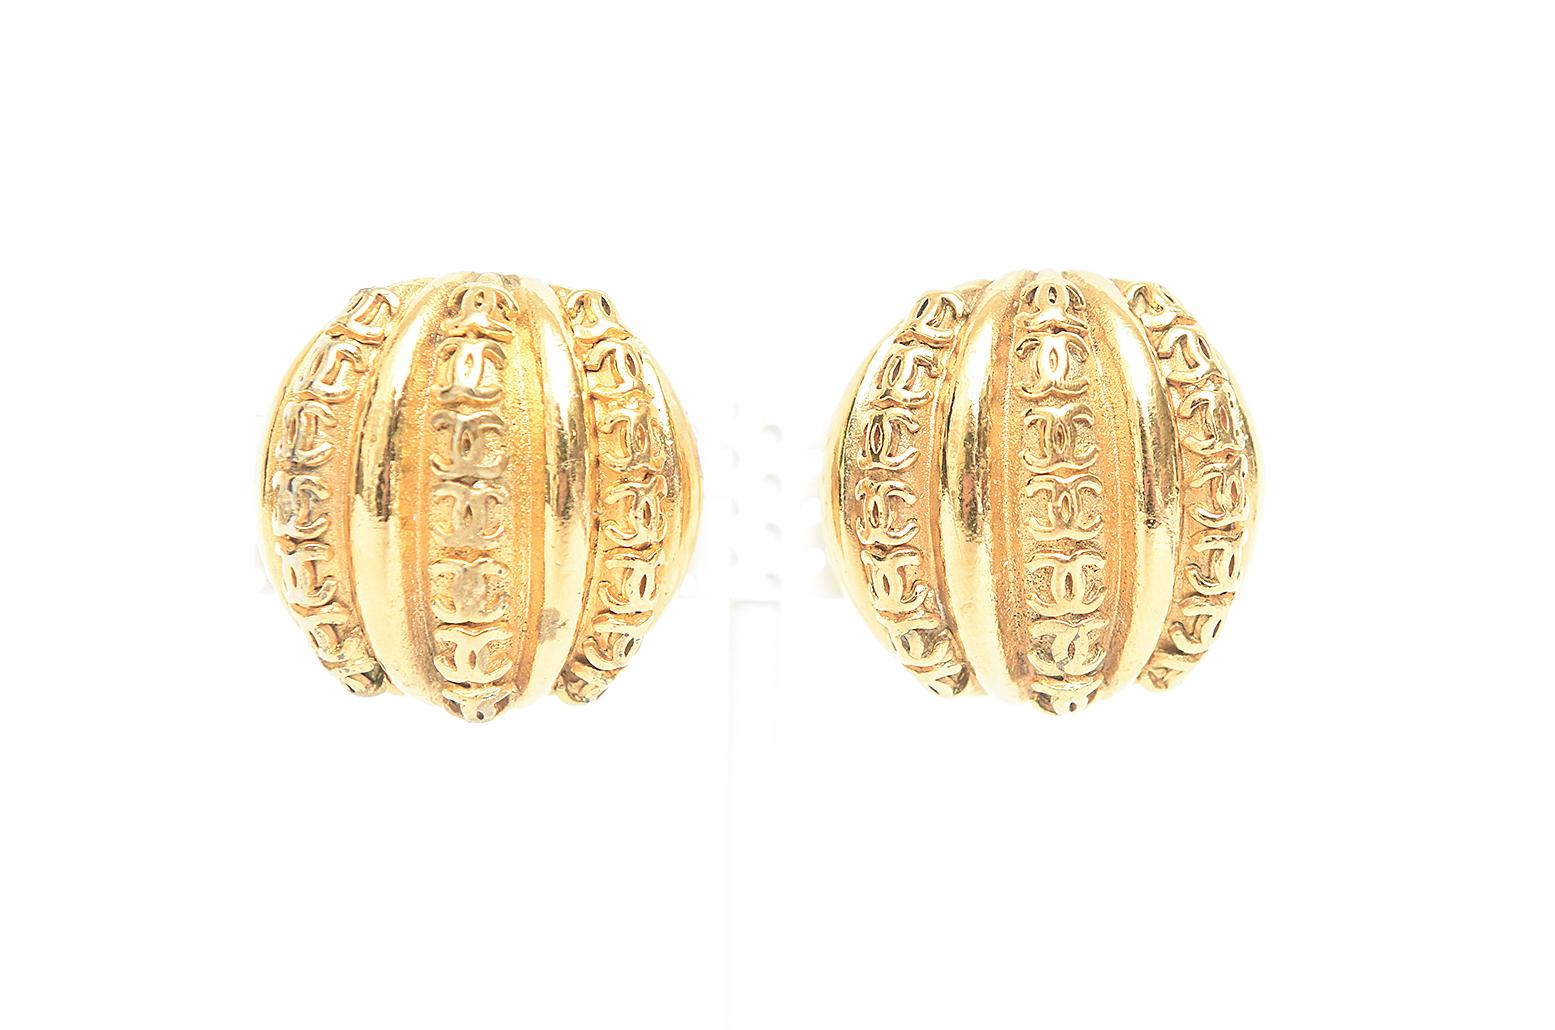 These unusual pair of Chanel and iconic clip on earrings look like melons or ridged domes with abundant cc's all over the top. It is gilt metal. These are from season 23 which is 1983 when Karl Lagerfeld became creative director and Victoire De